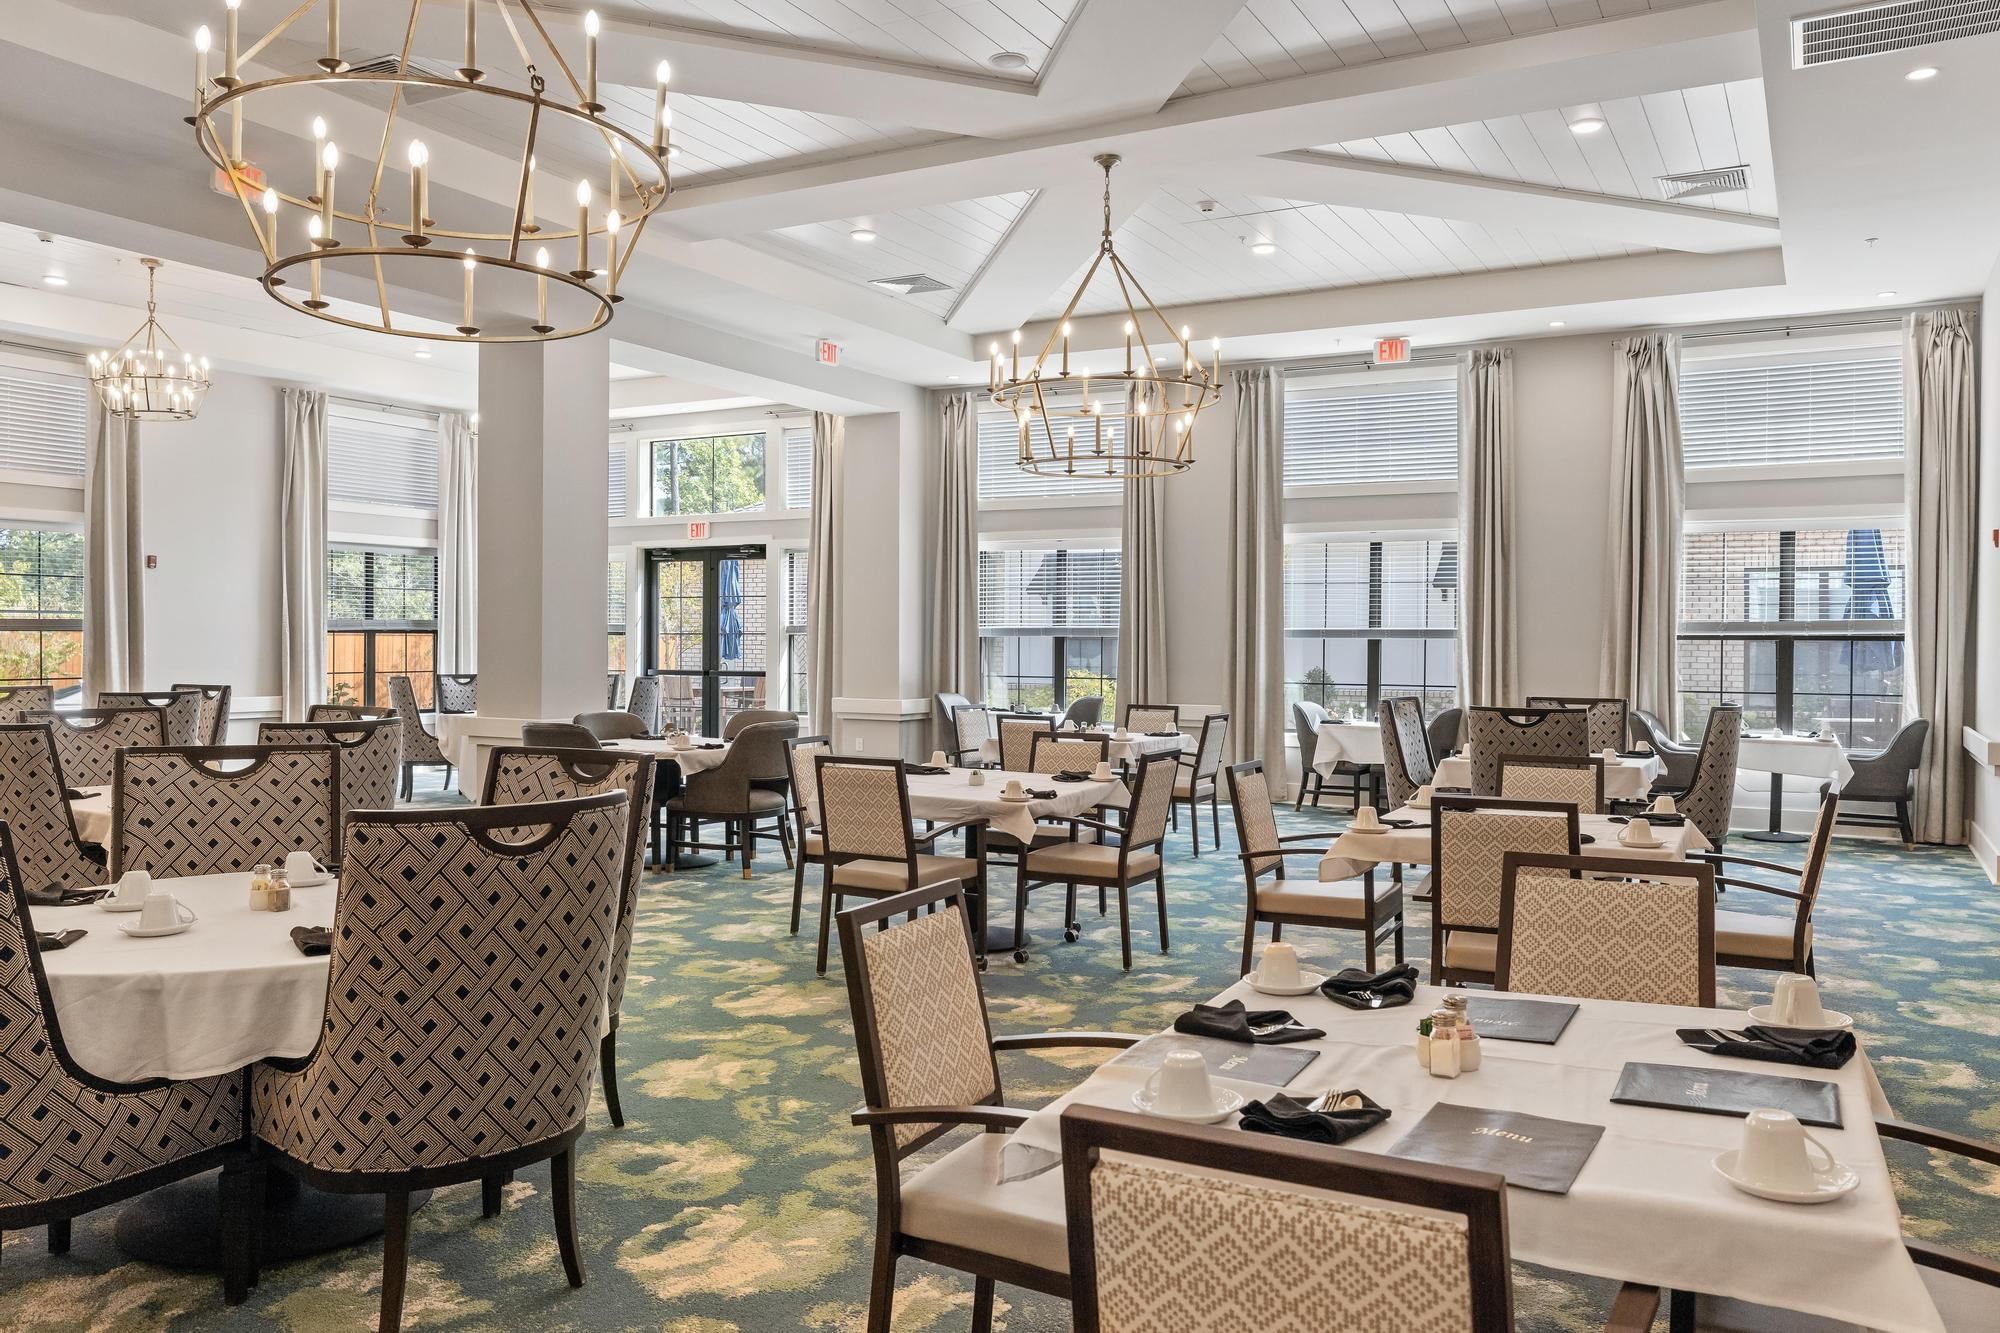 The Preserve at Meridian dining area with fireplace, tables, and chandeliers